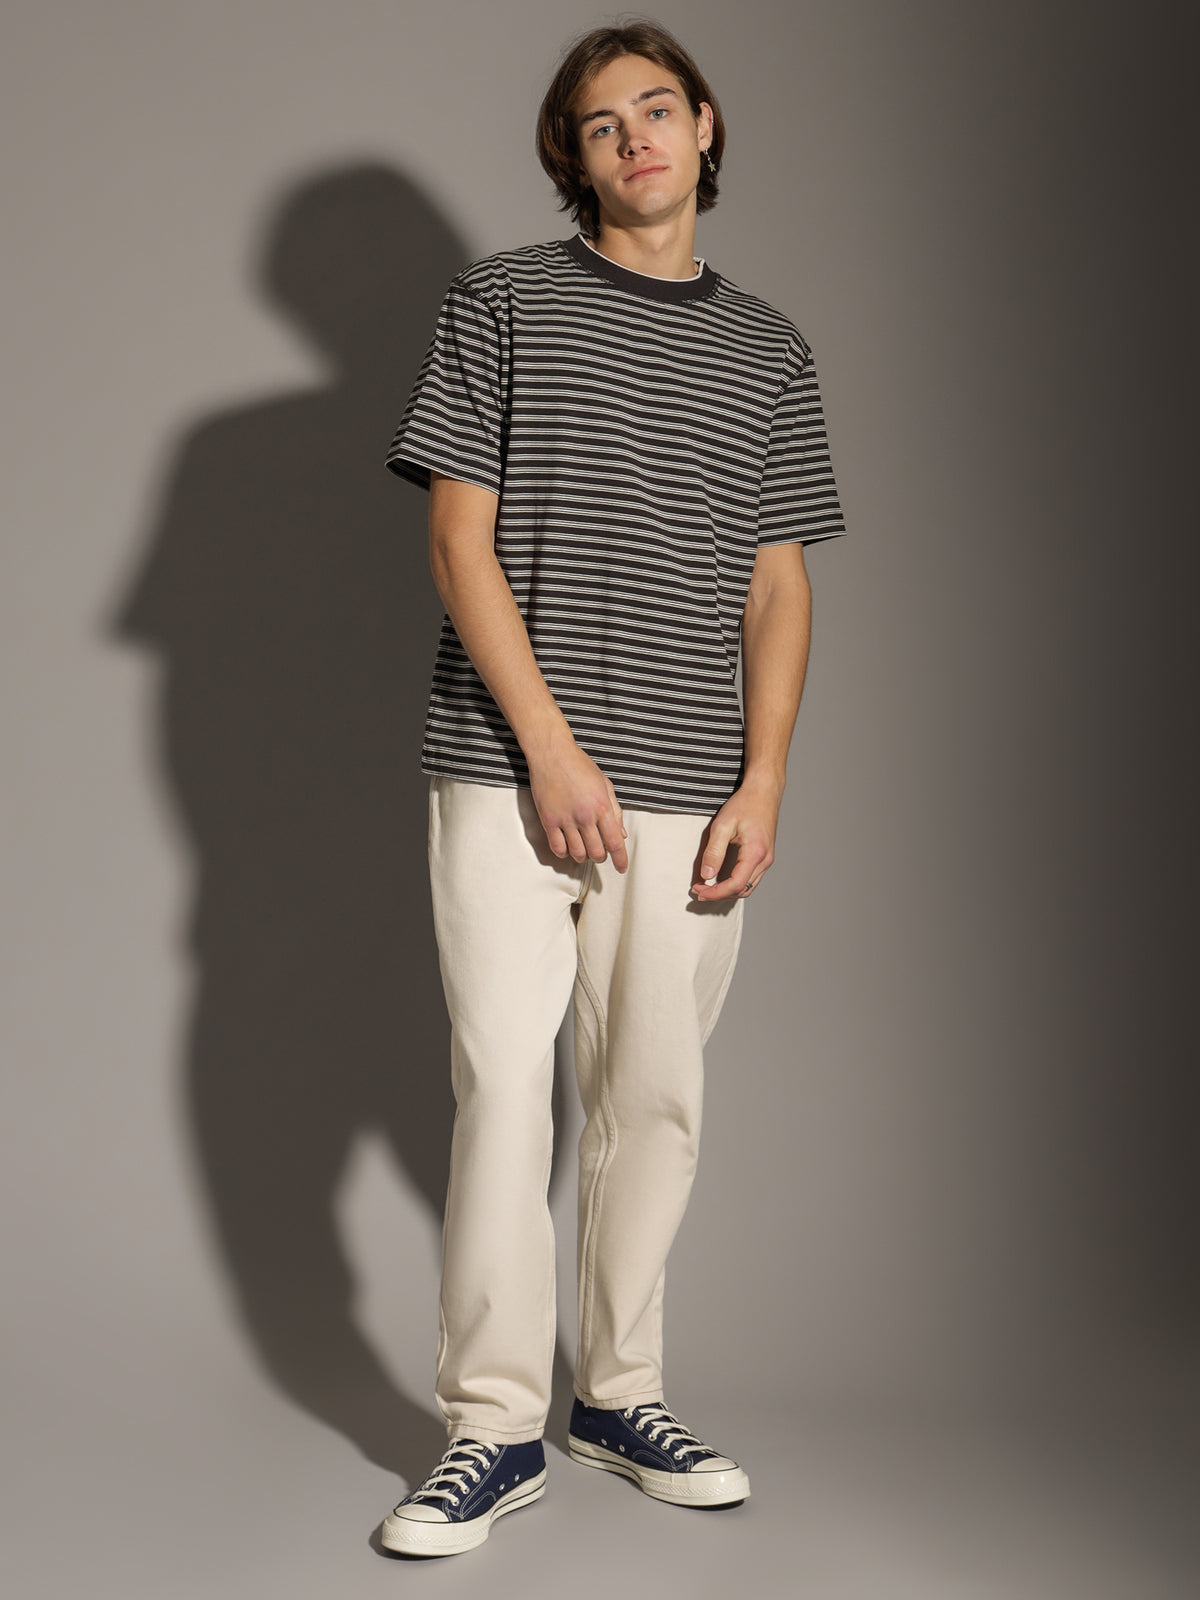 Silas Striped T-Shirt in Coal